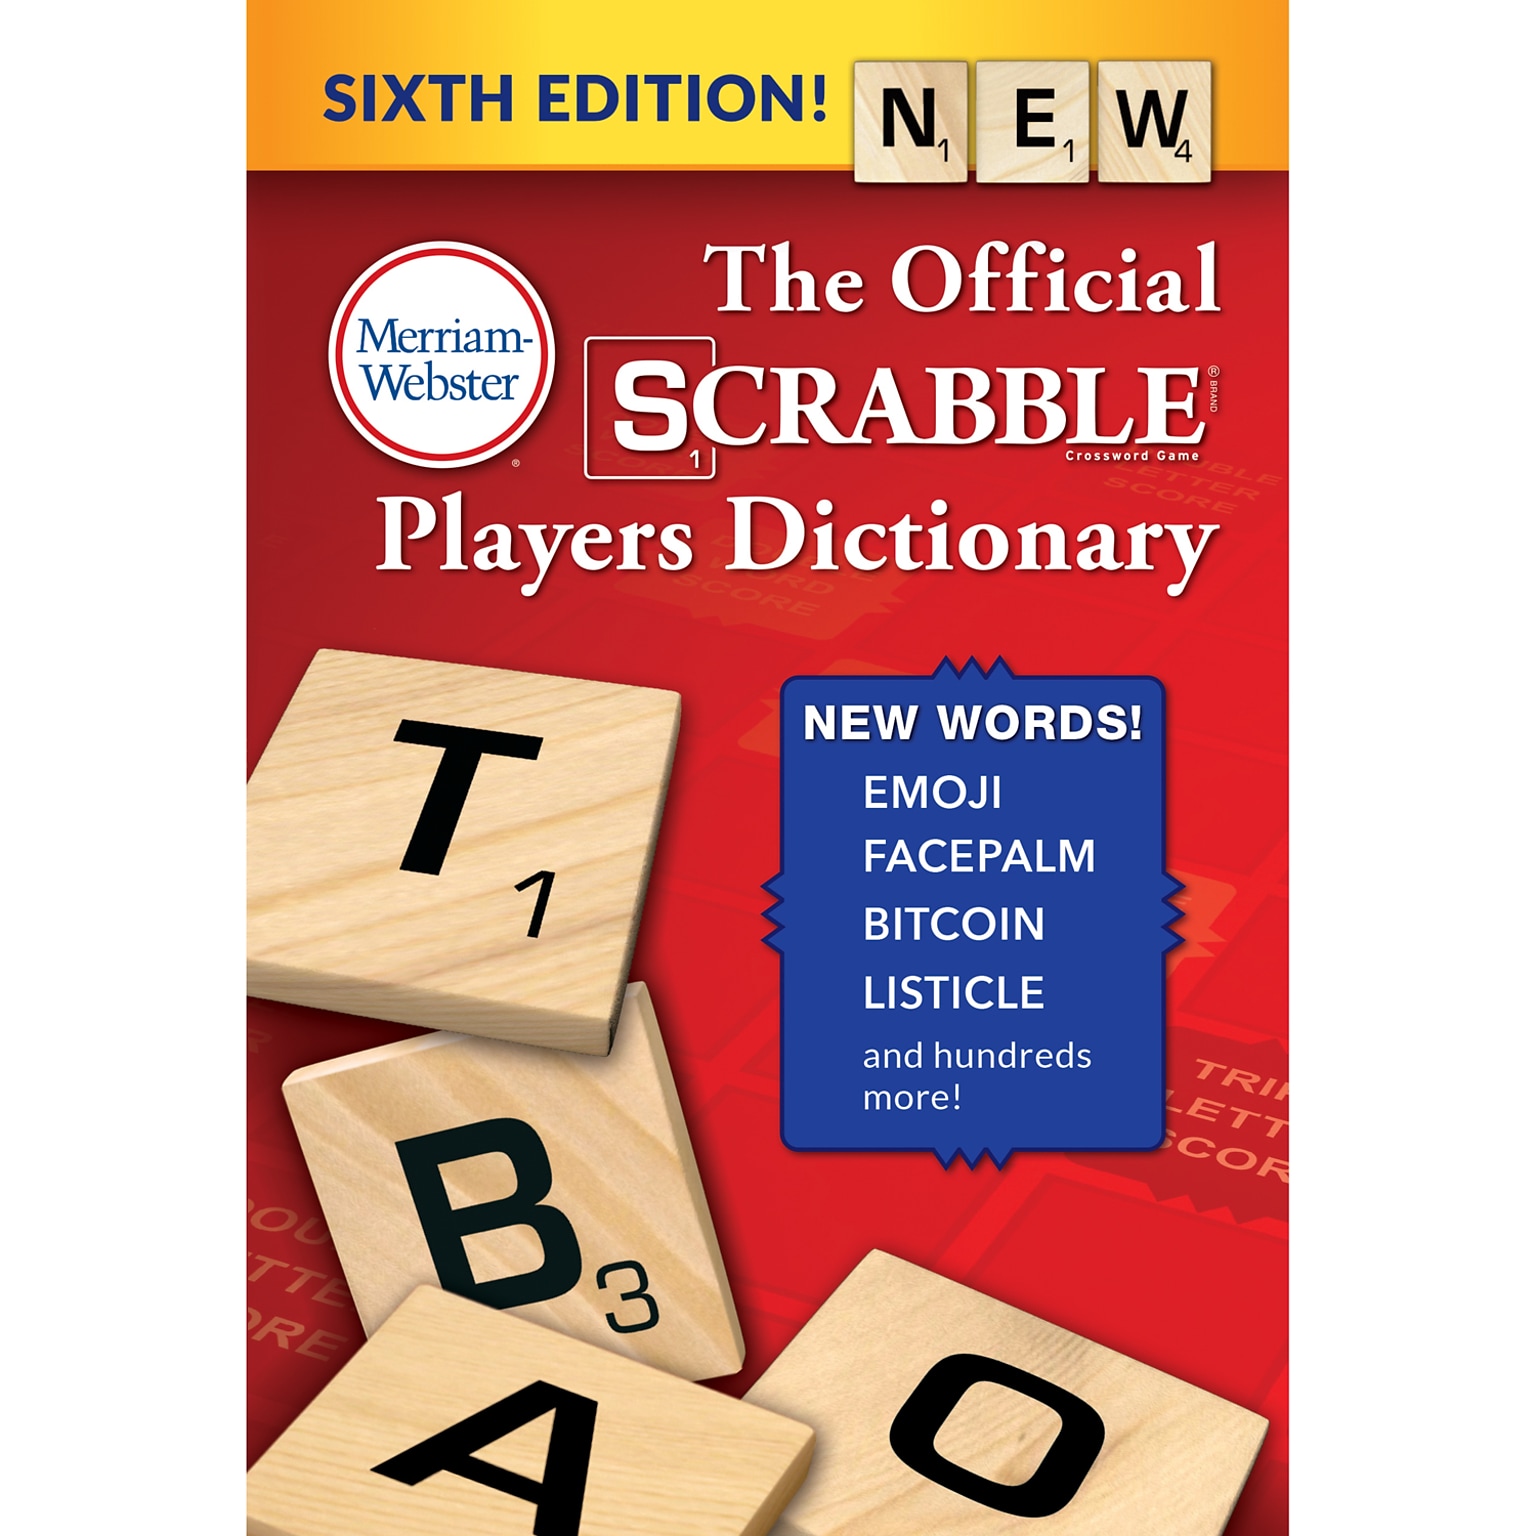 Merriam-Webster The Official SCRABBLE Players Dictionary, 6th Edition Trade Paperback